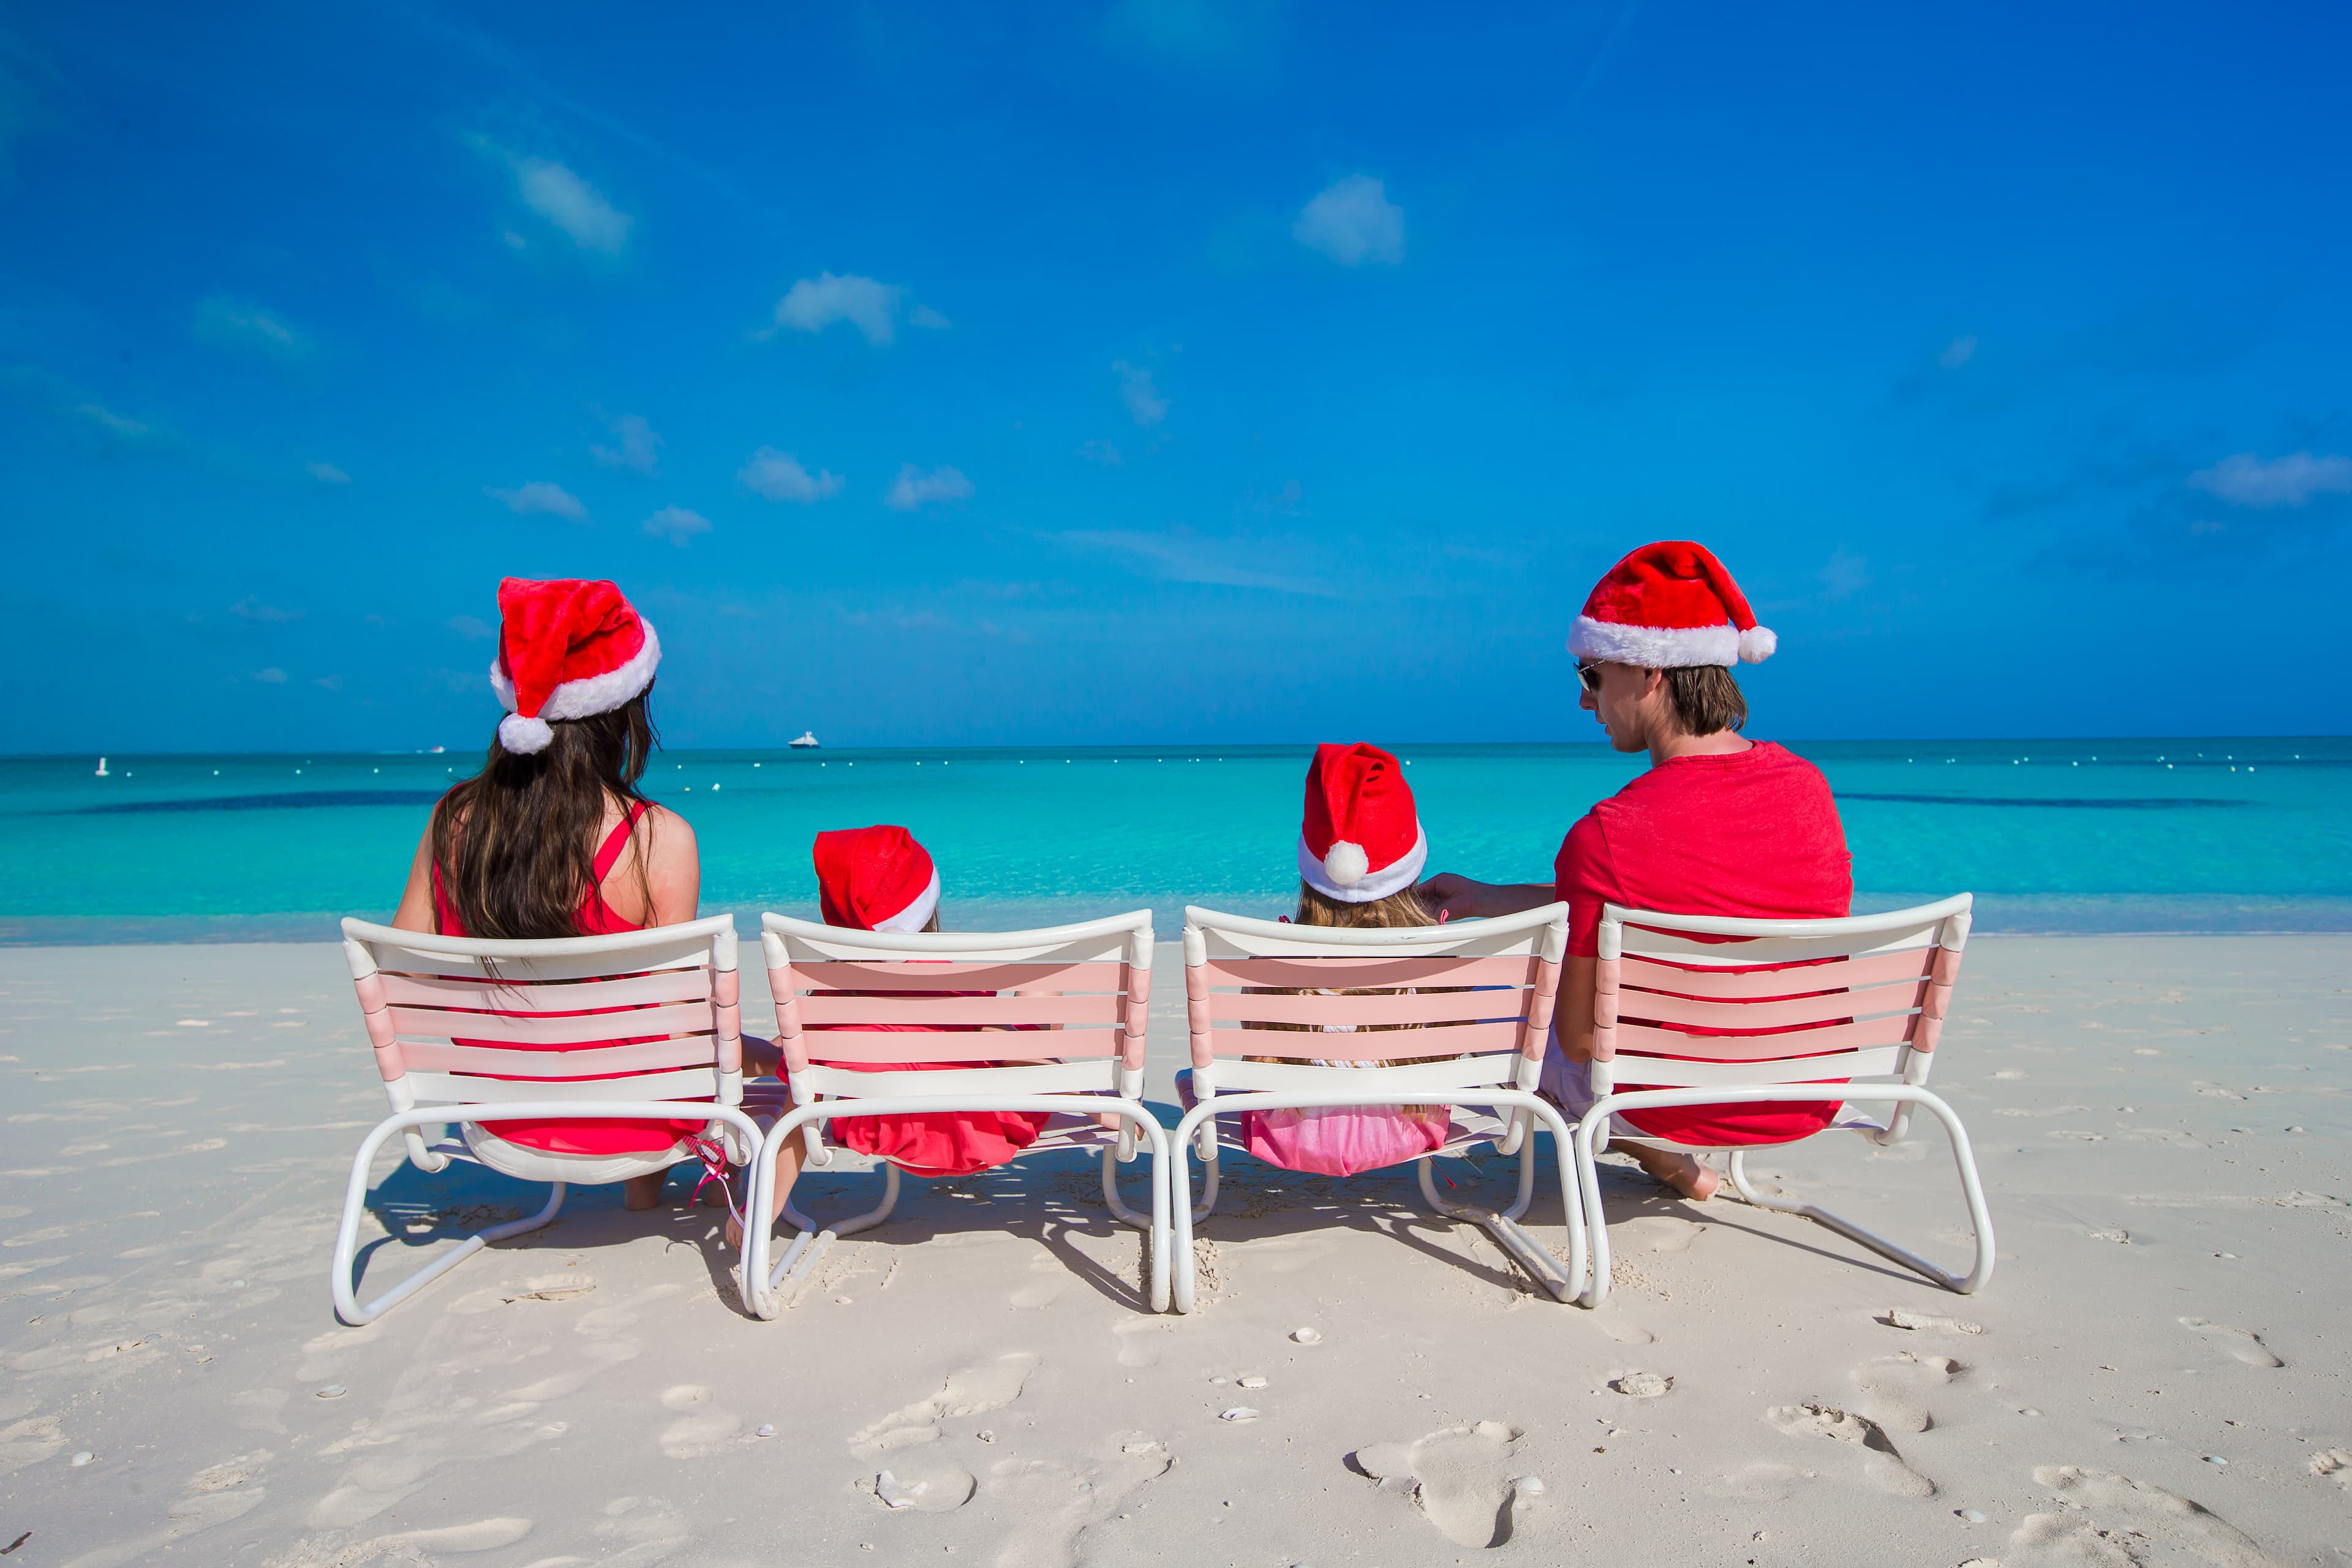 A family of four sits in beach chairs on the sand at the ocean while wearing bright red Santa hats